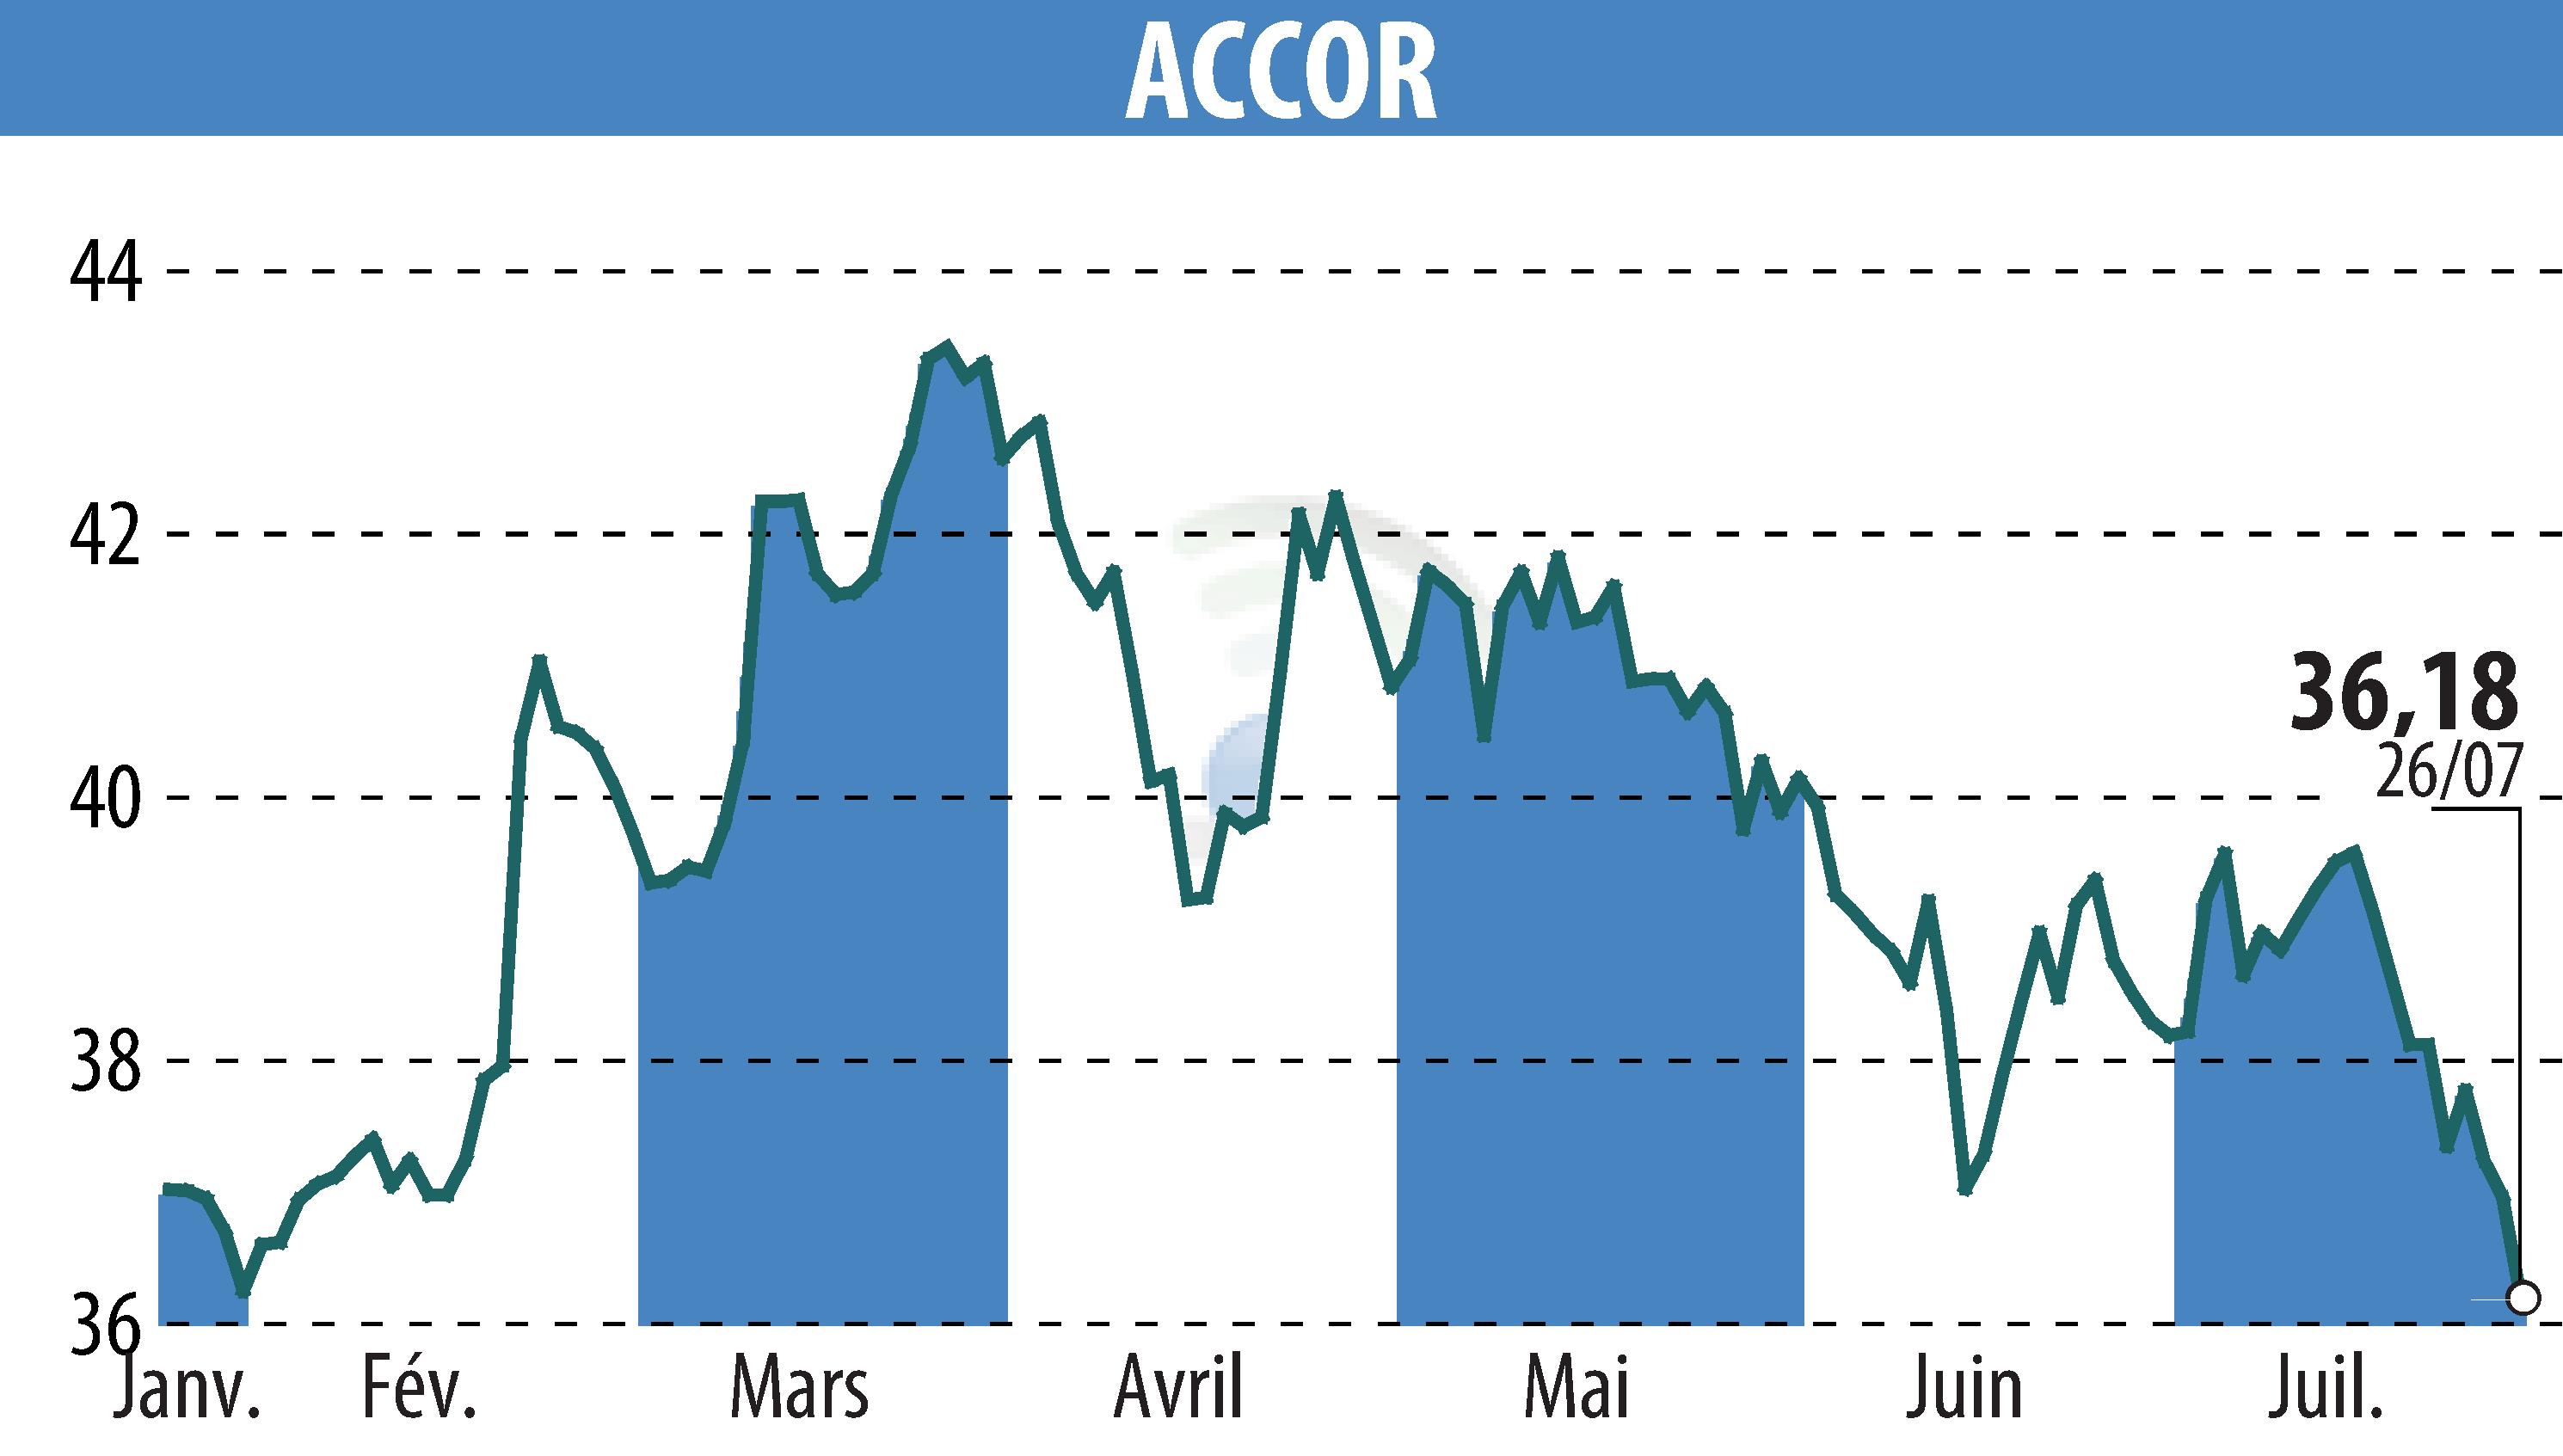 Stock price chart of ACCOR (EPA:AC) showing fluctuations.